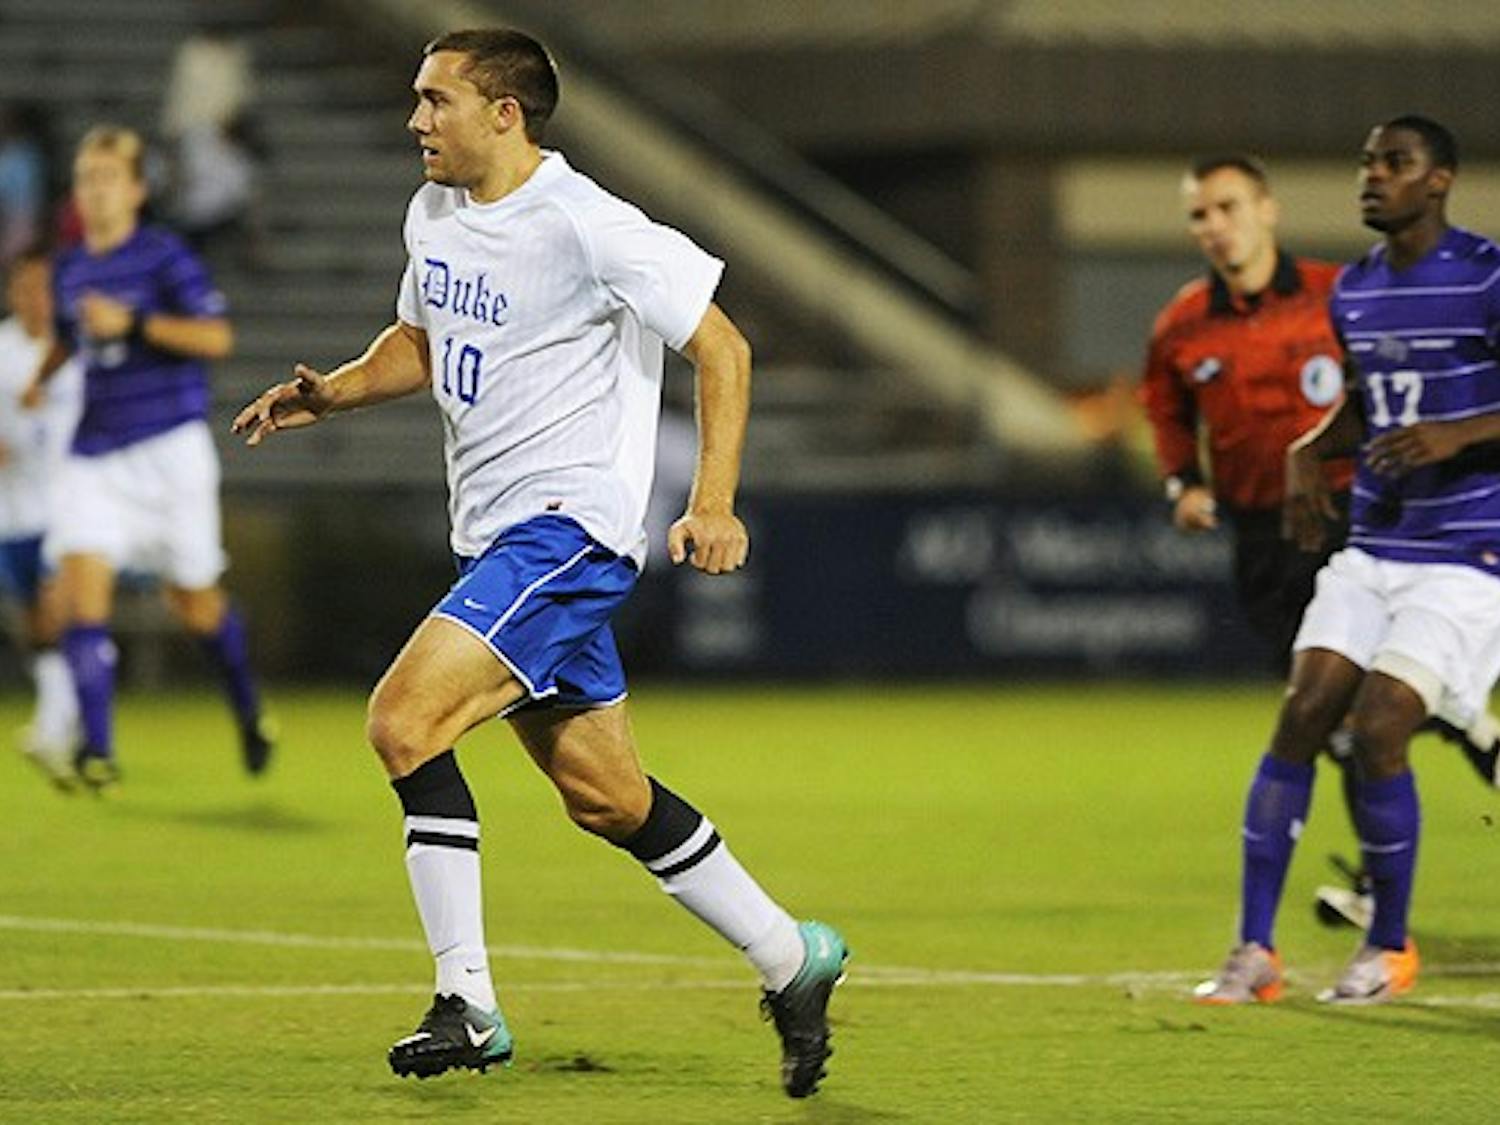 The Blue Devils face Furman, which has won five straight games including a shutout over College of Charleston.